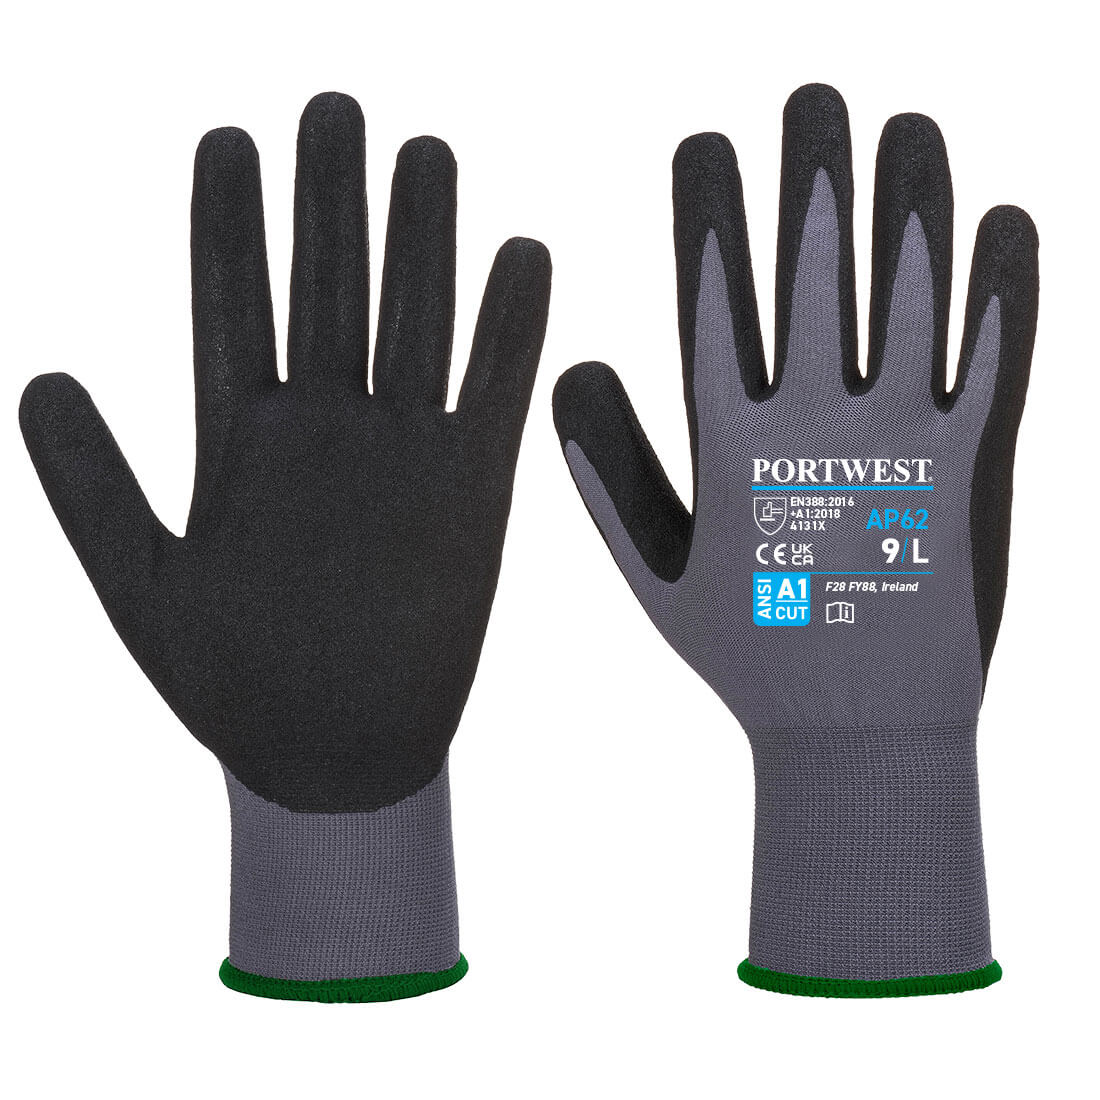 HAND PROTECTION, Grip Performance